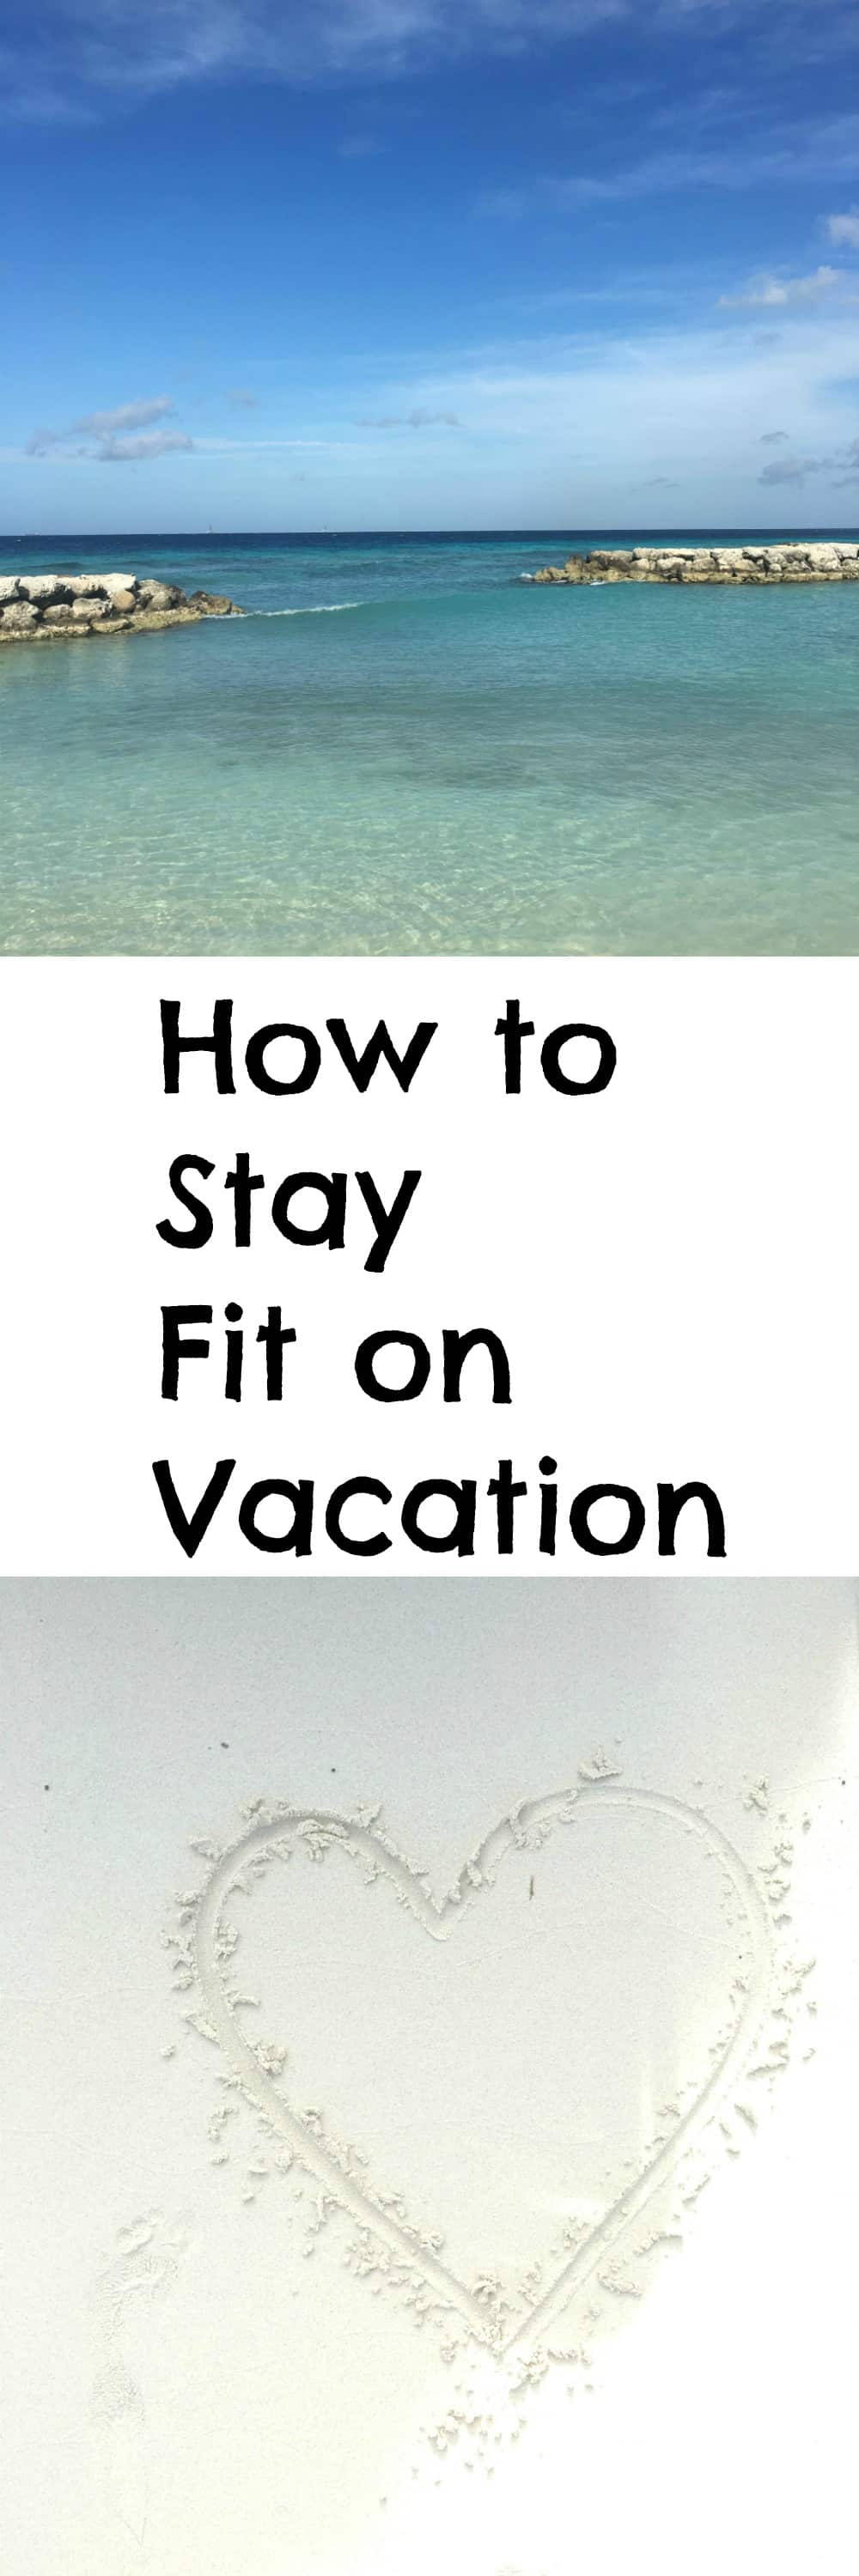 Vacation coming? Here are a few health and fitness tips that will keep you feeling good, happy and in shape! lemonsforlulu.com